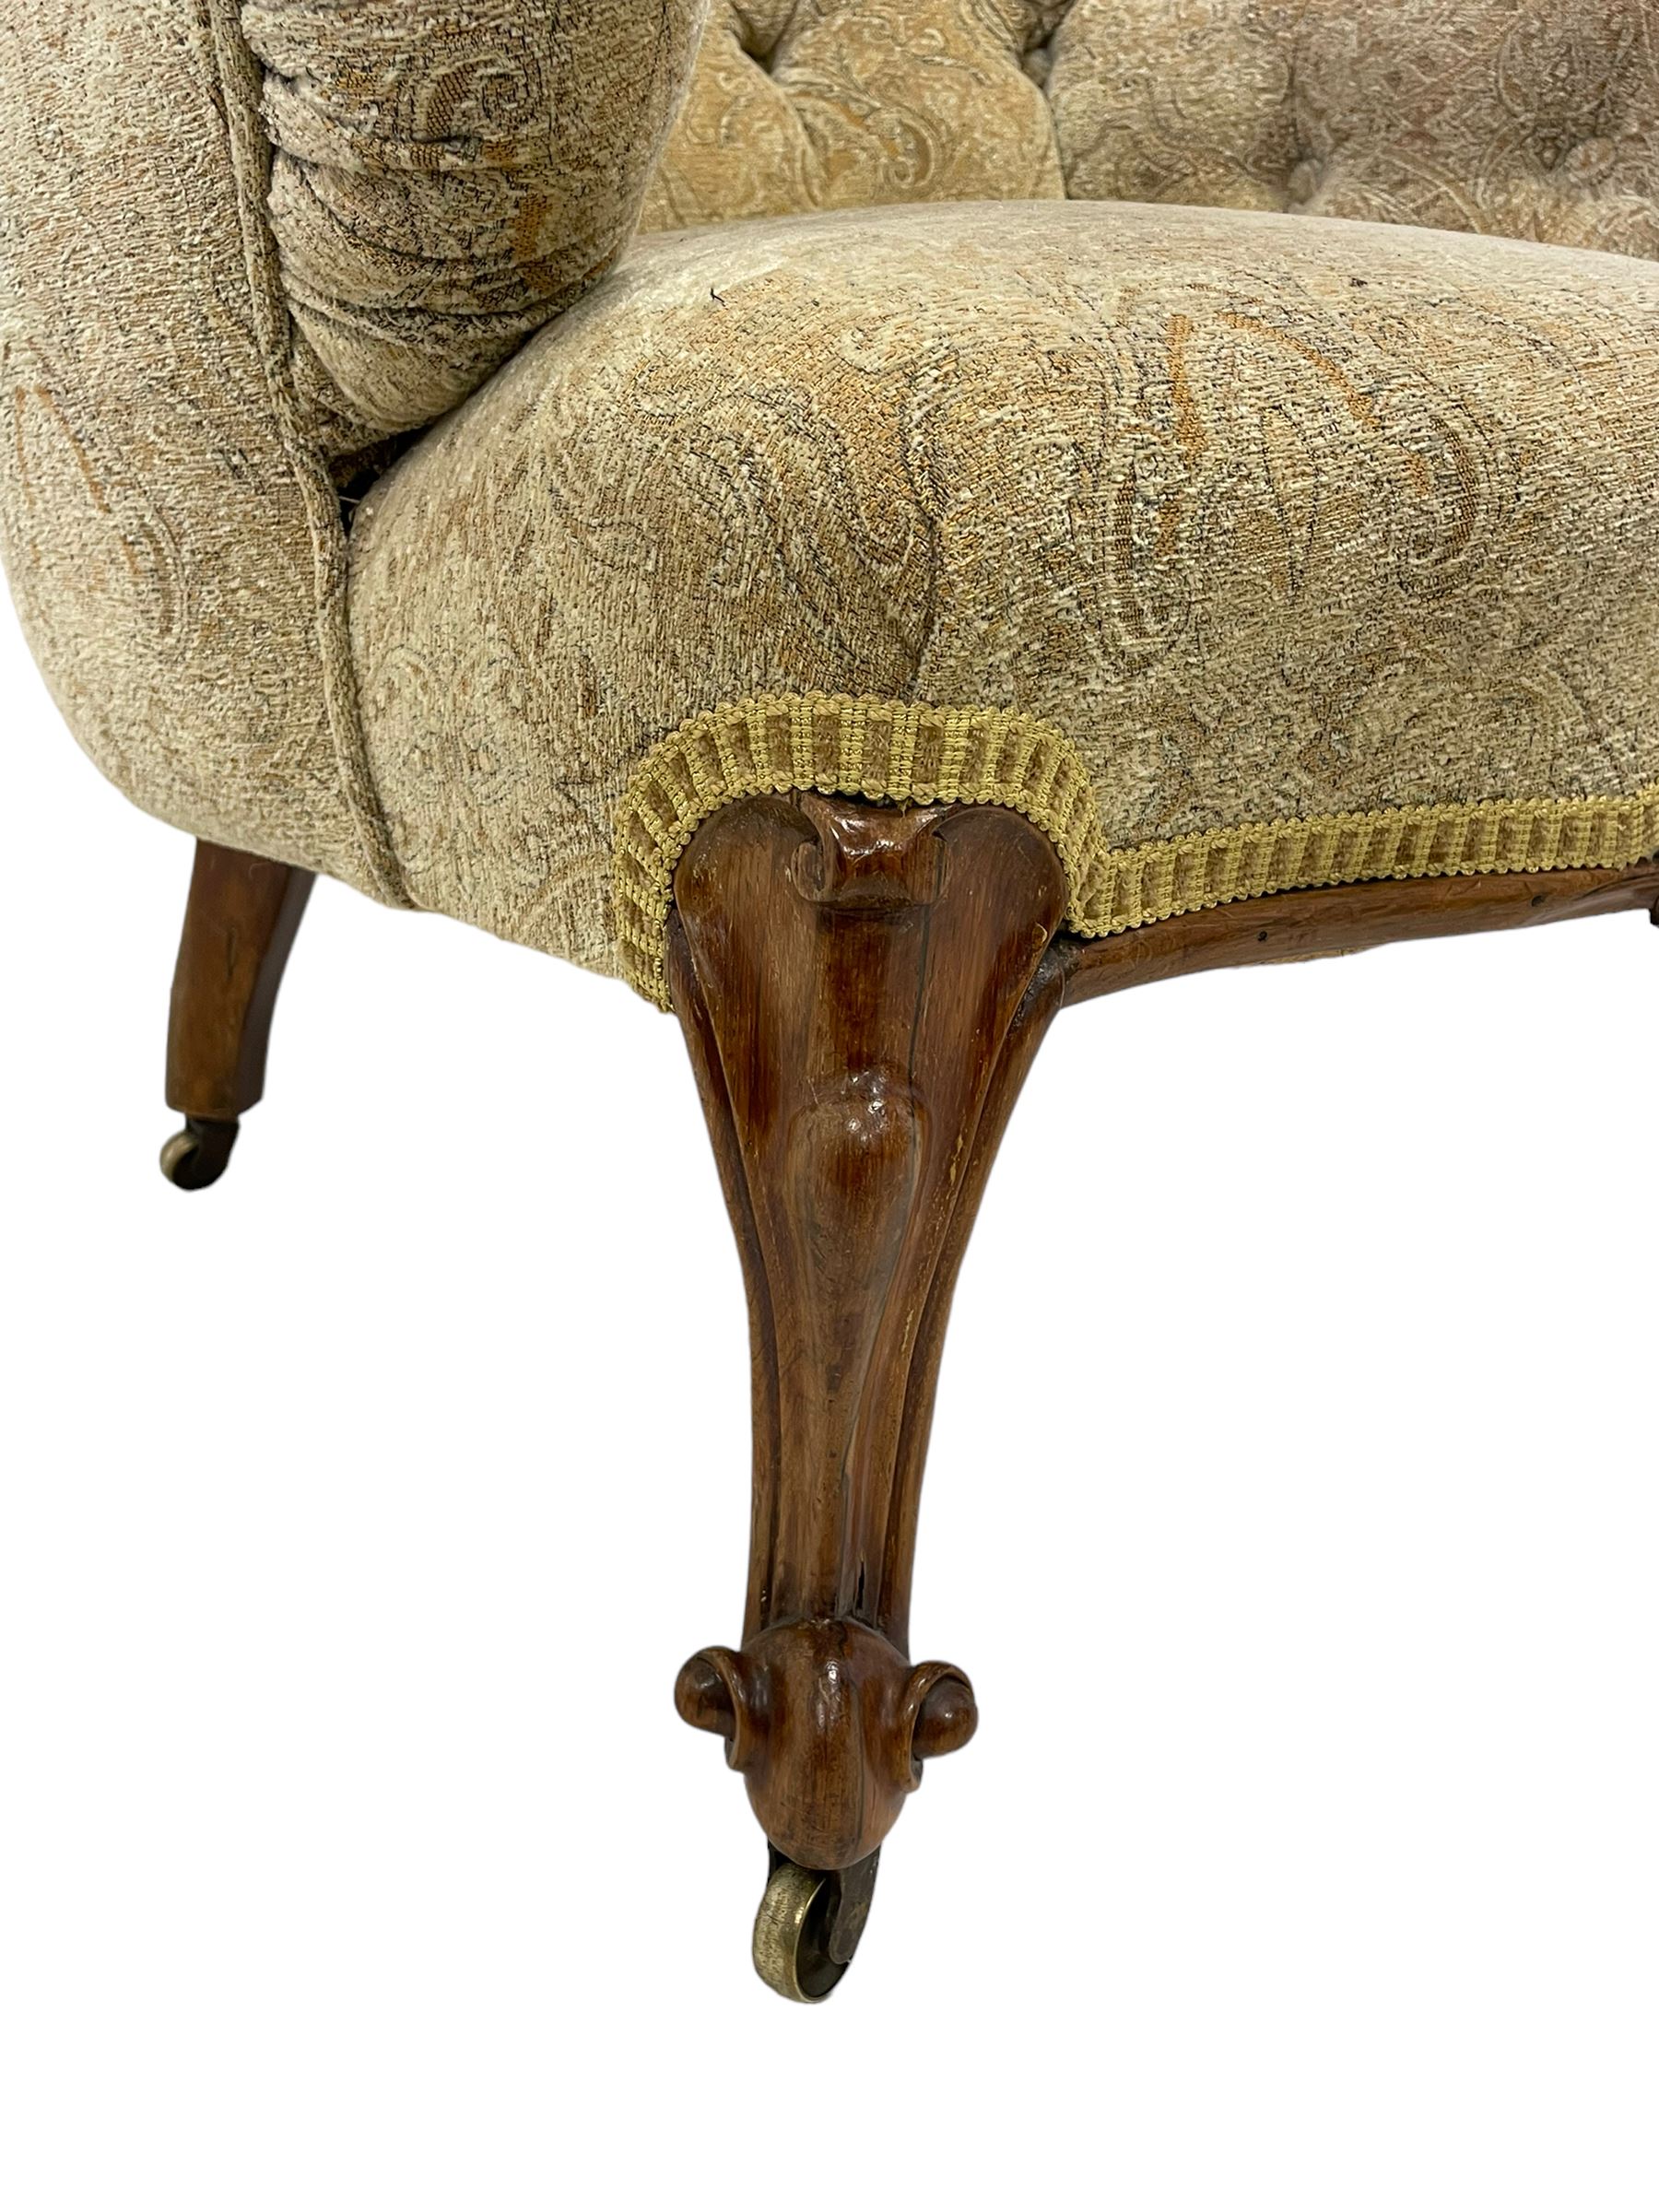 19th century rosewood framed armchair - Image 2 of 6